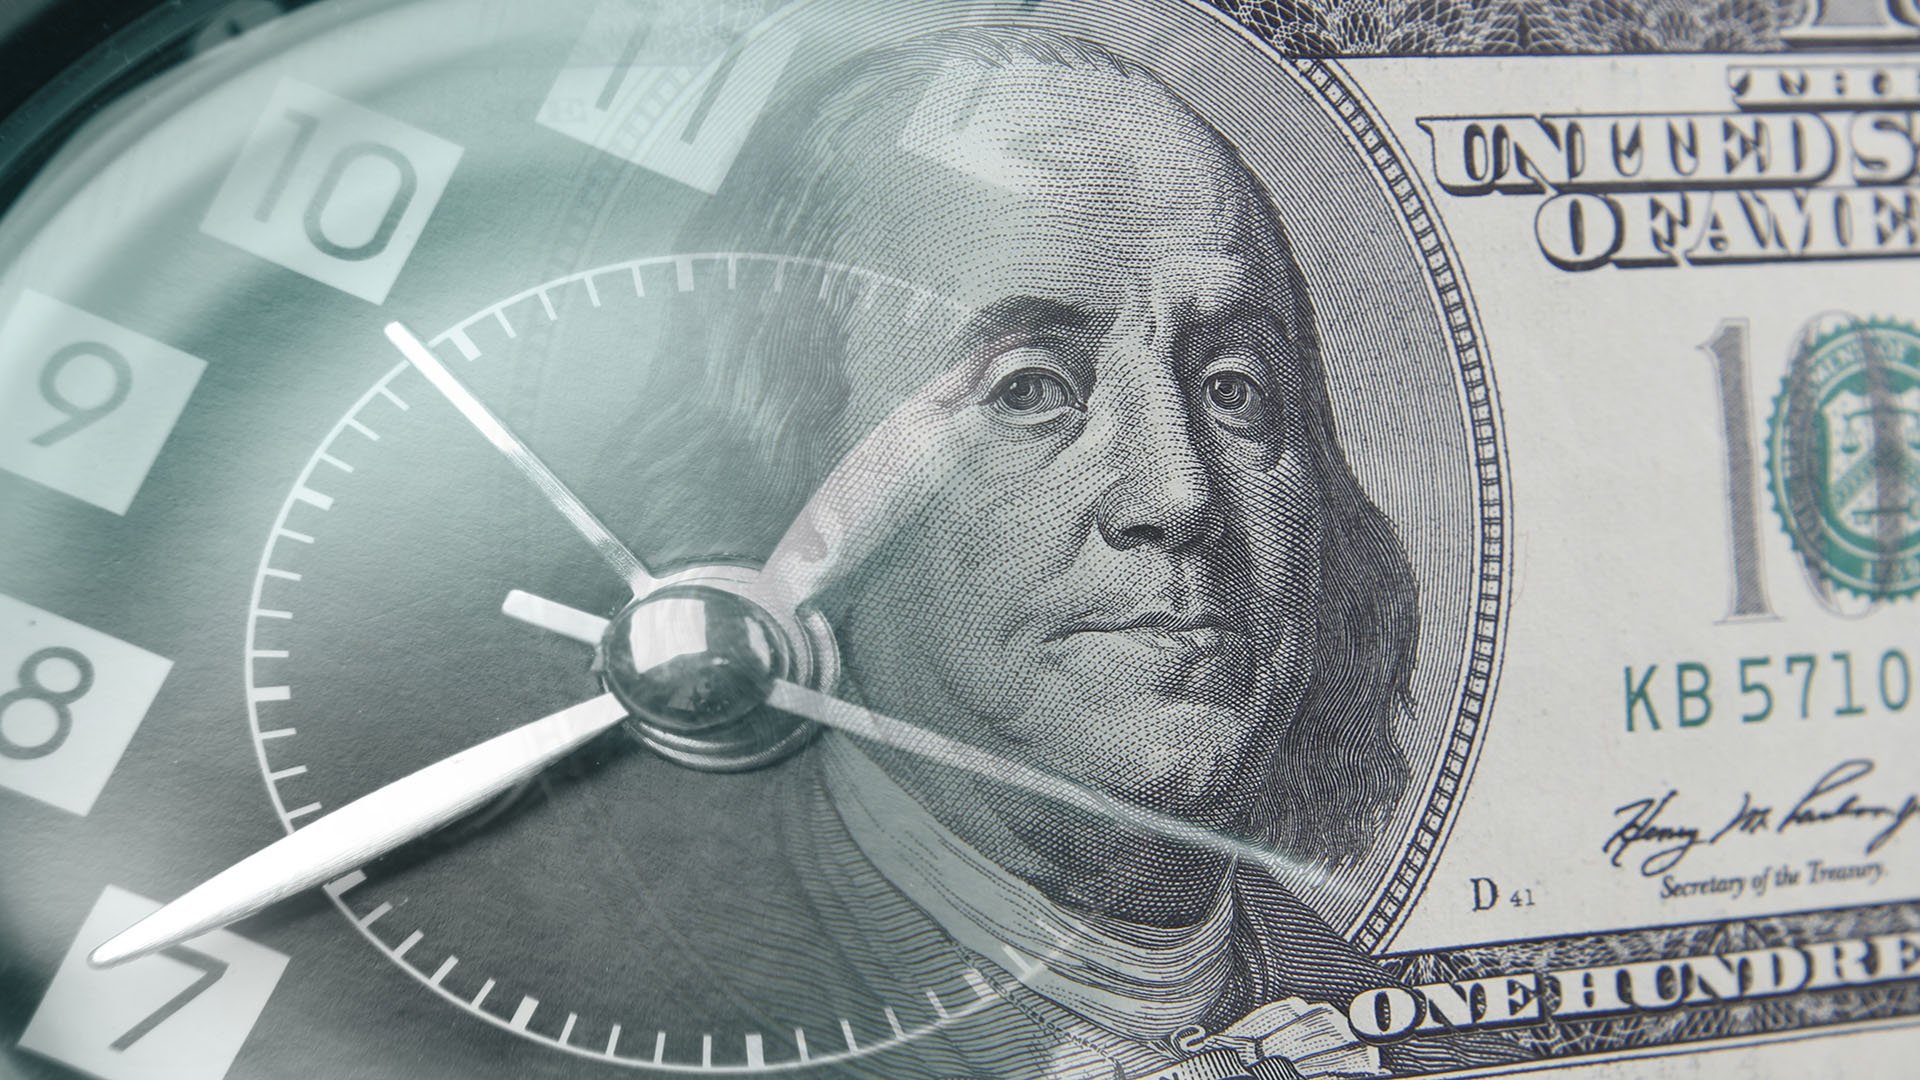 100 dollar bill and clock merged together